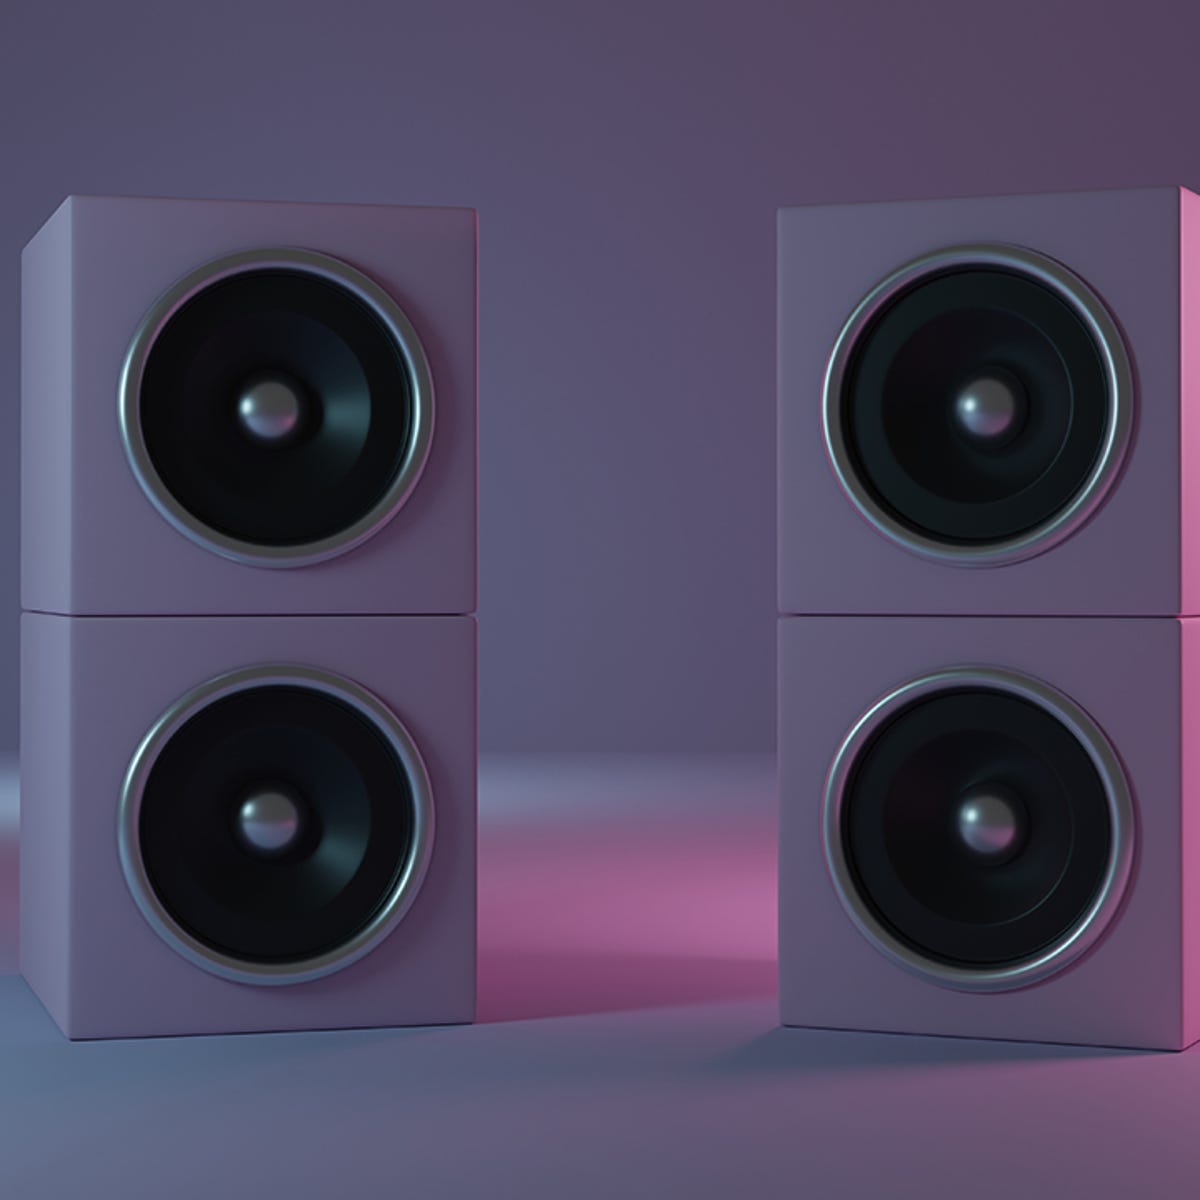 The best stereo speakers | ZDNET